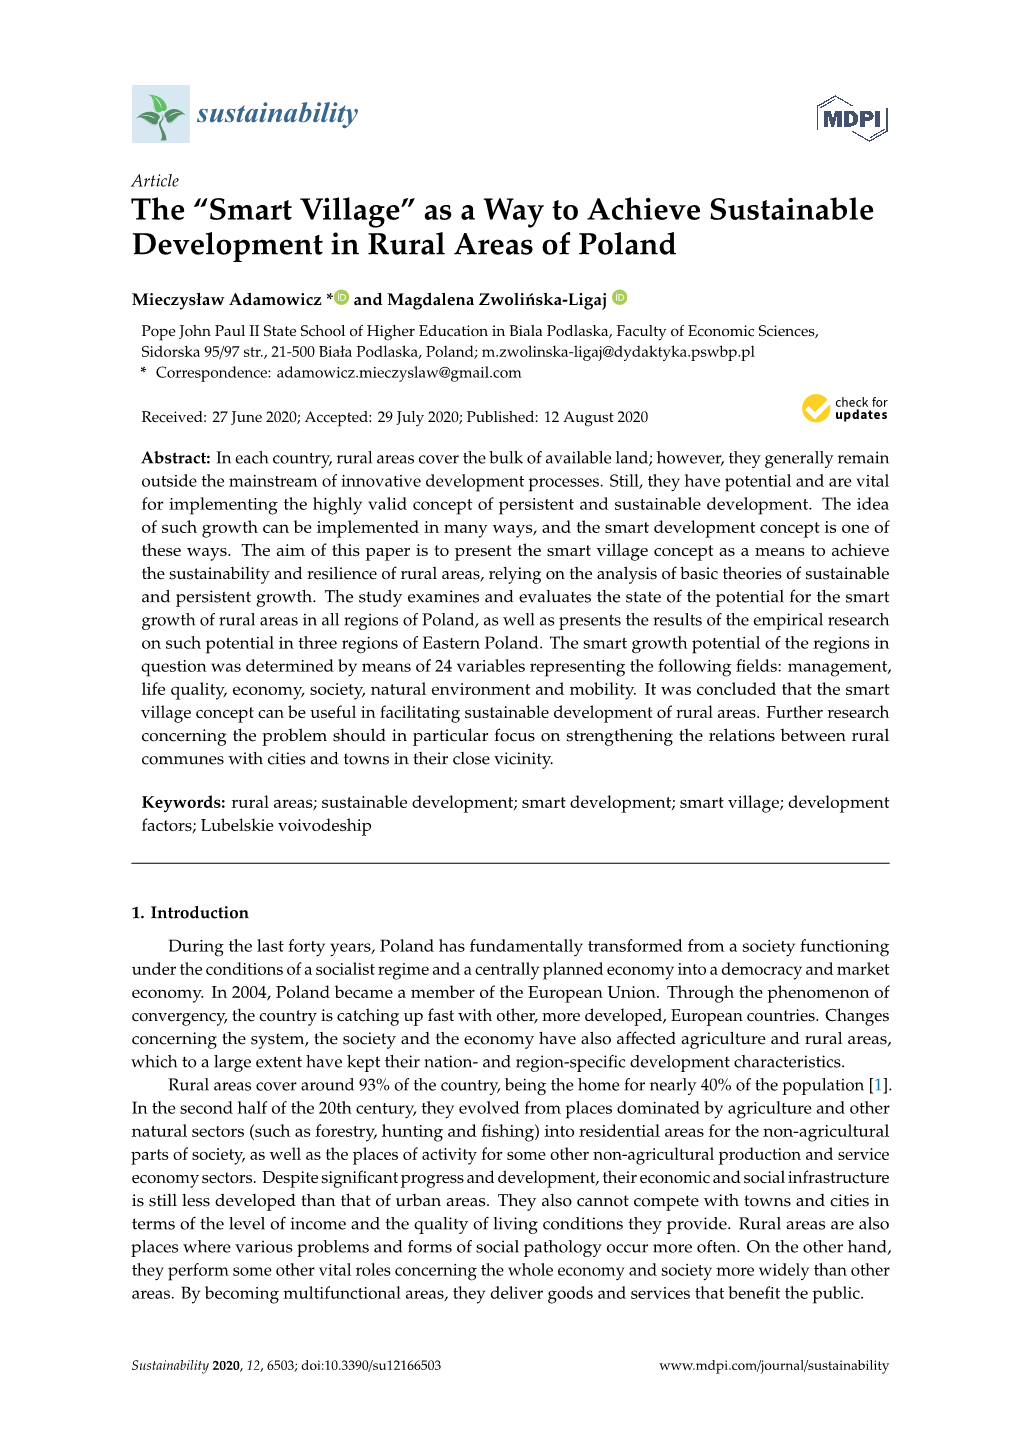 The “Smart Village” As a Way to Achieve Sustainable Development in Rural Areas of Poland